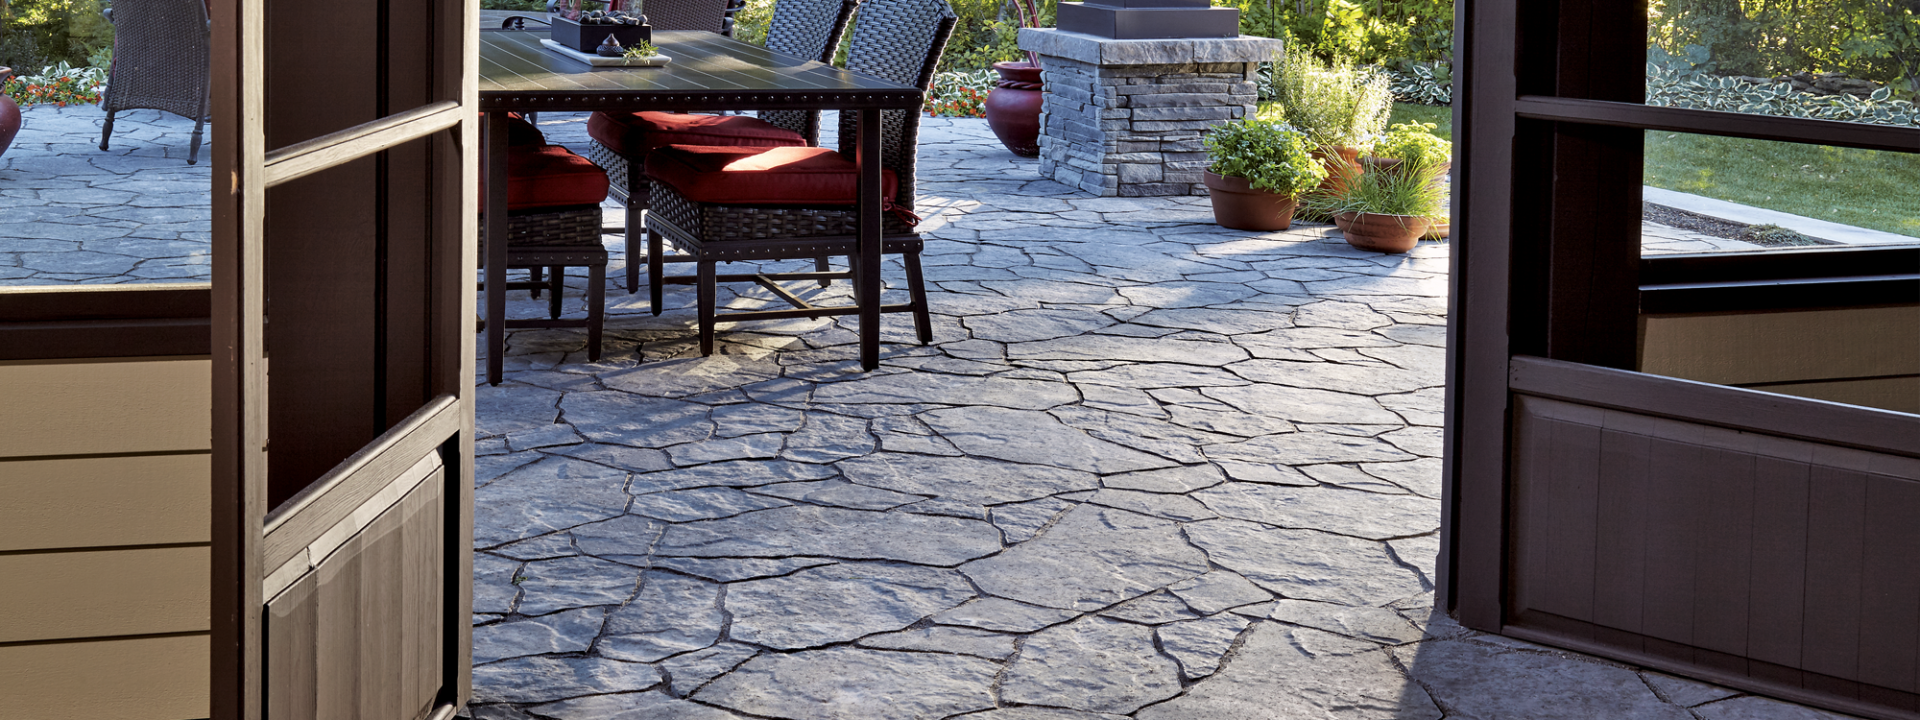 PAVERS & LANDSCAPING